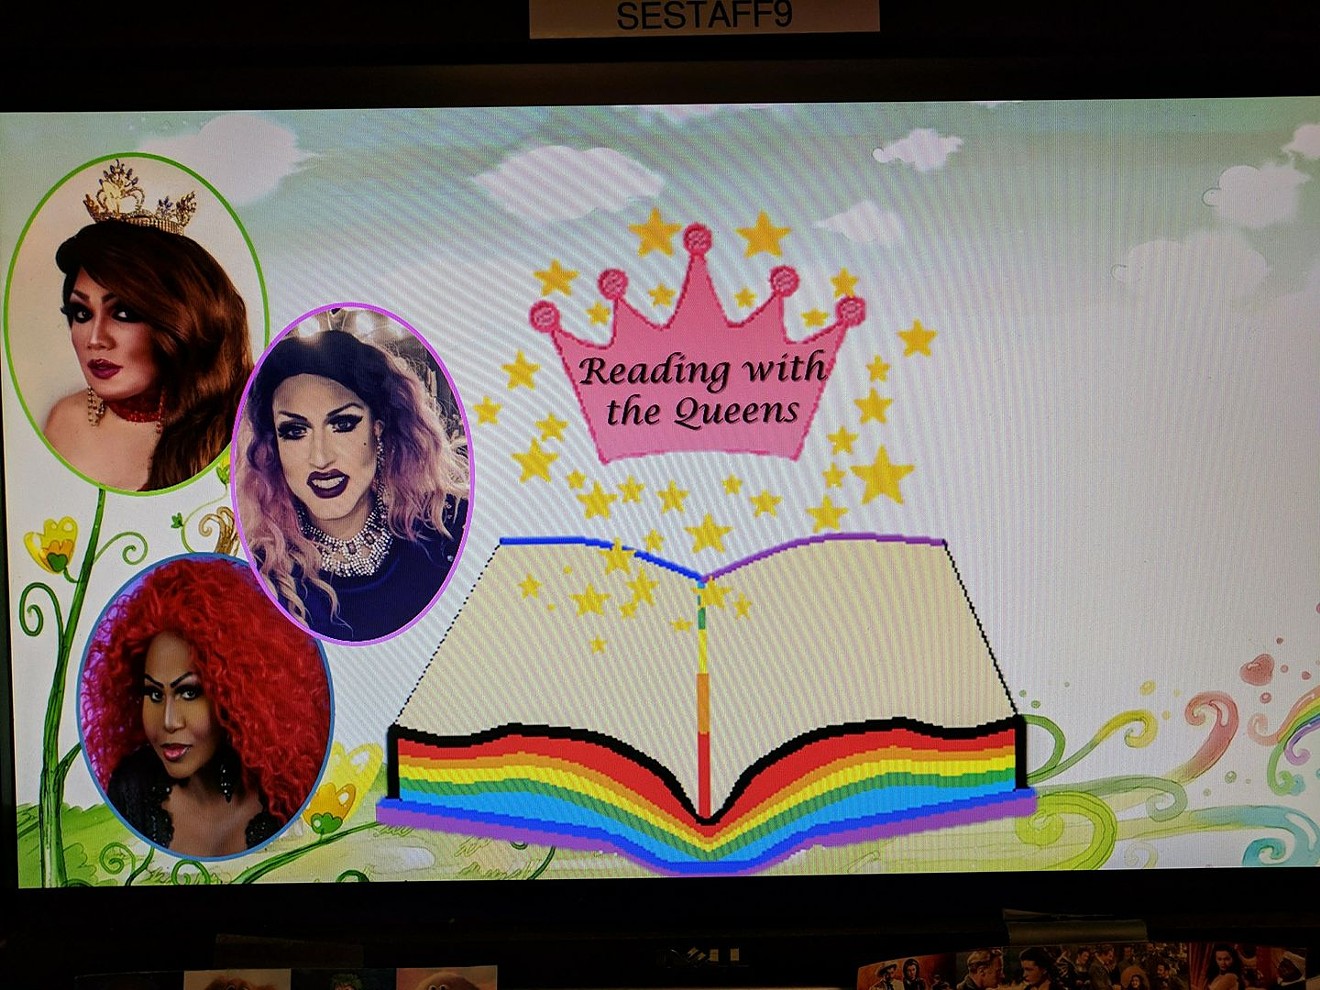 Here's the image Michelle Miranda-Thorstad posted on Facebook before the drag reading event was cancelled.